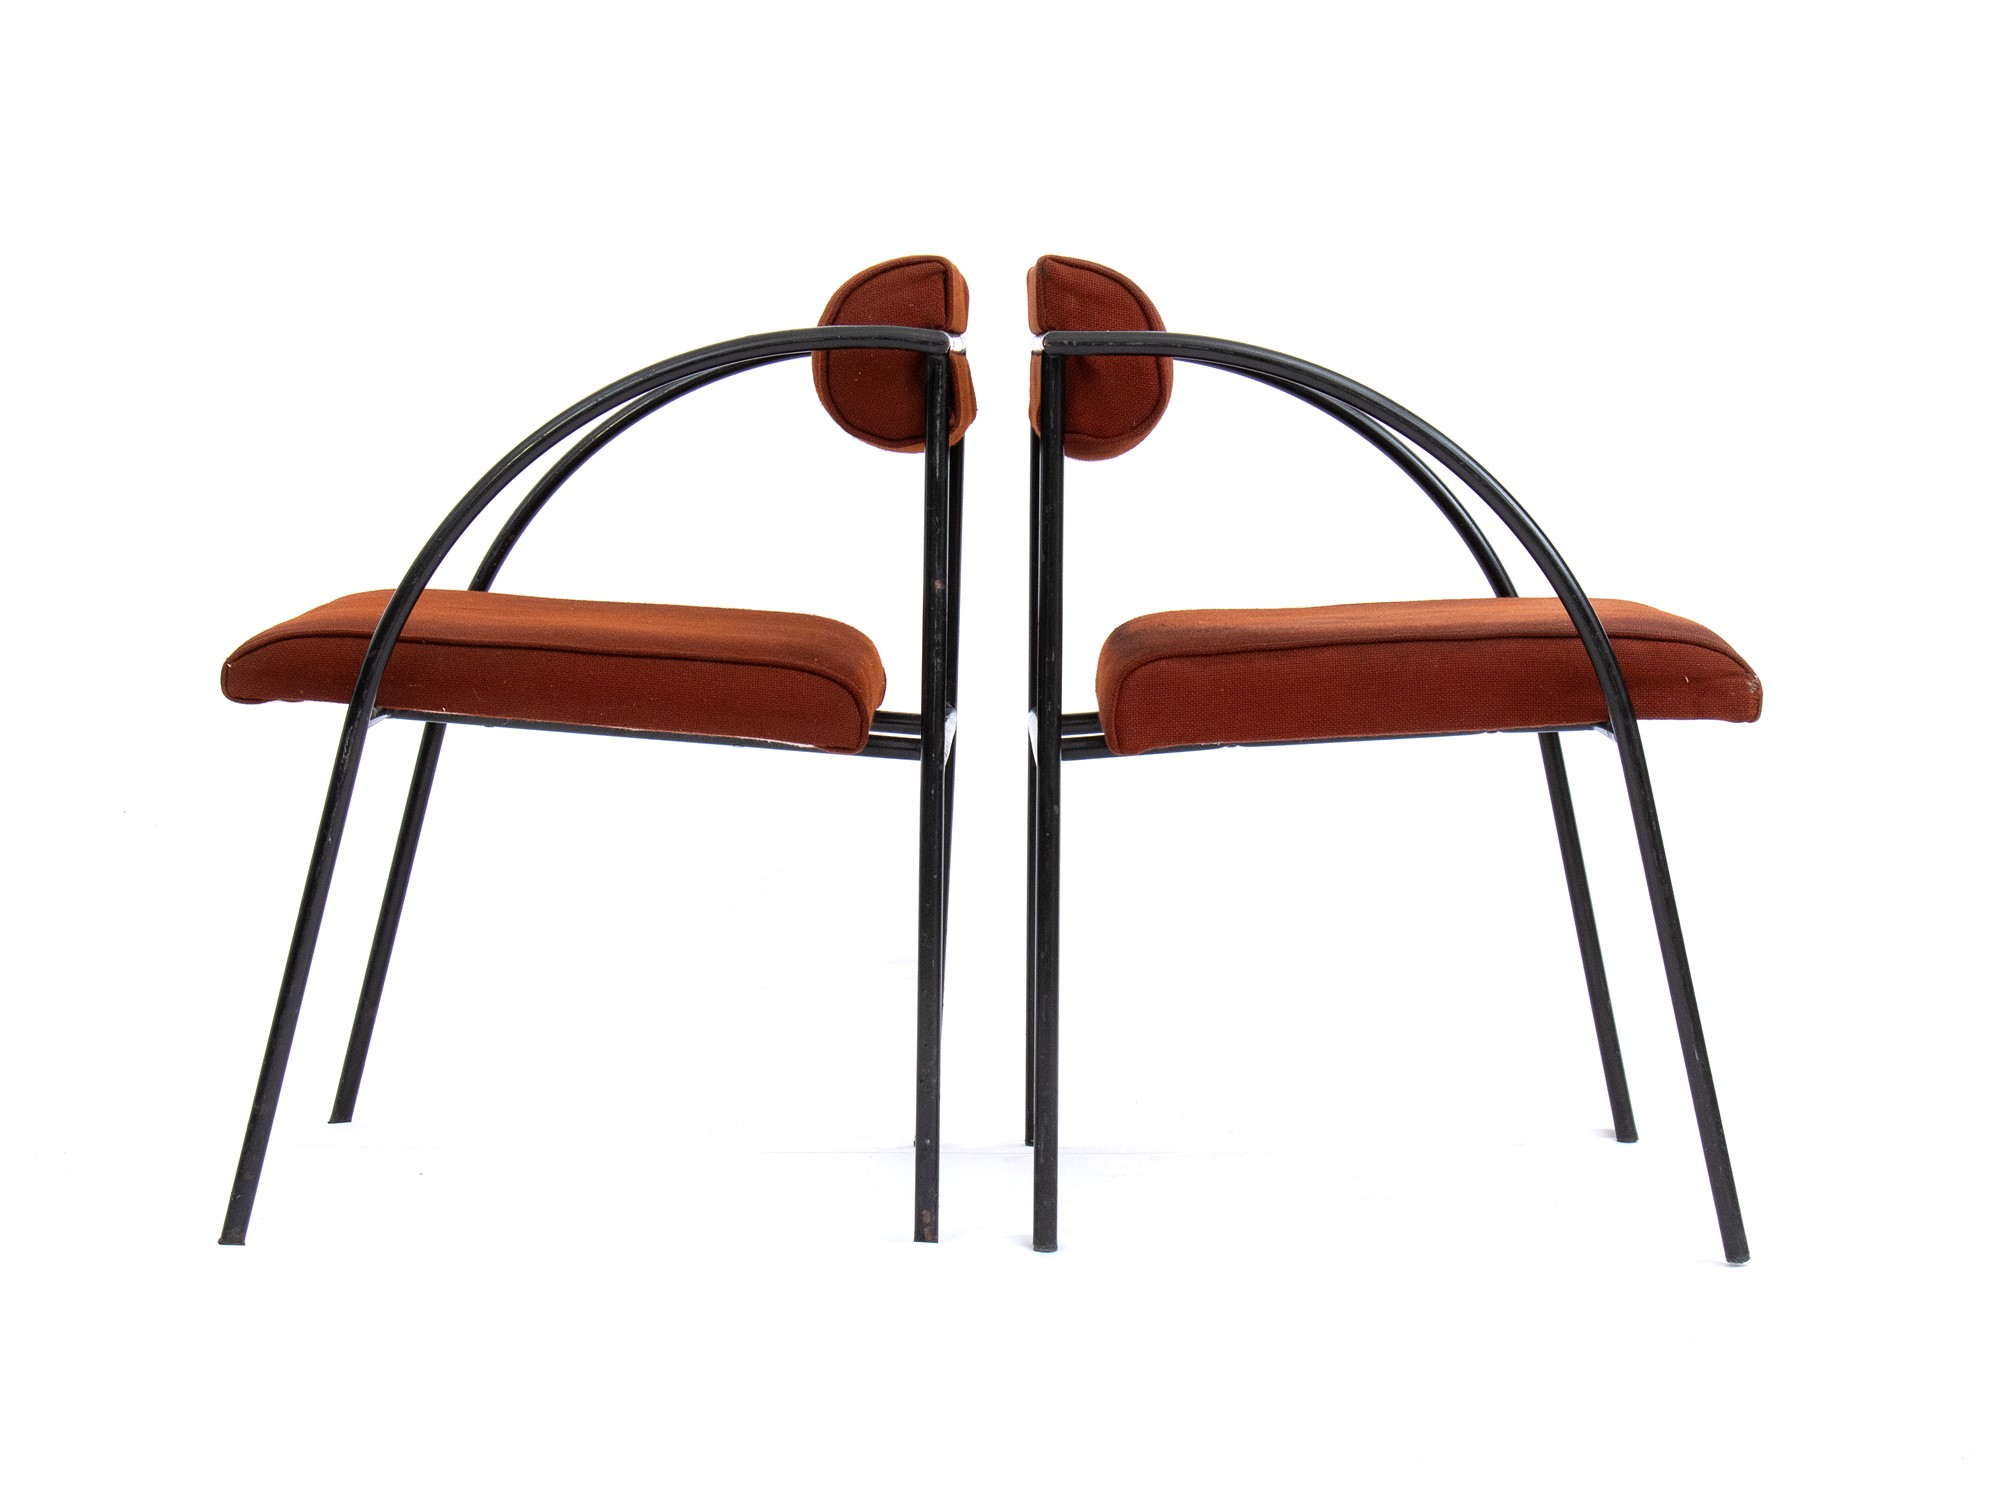 Rodney Kinsman Londra 1943 Set of two Wien chairs with round metal structure and curved armrests - Image 10 of 15